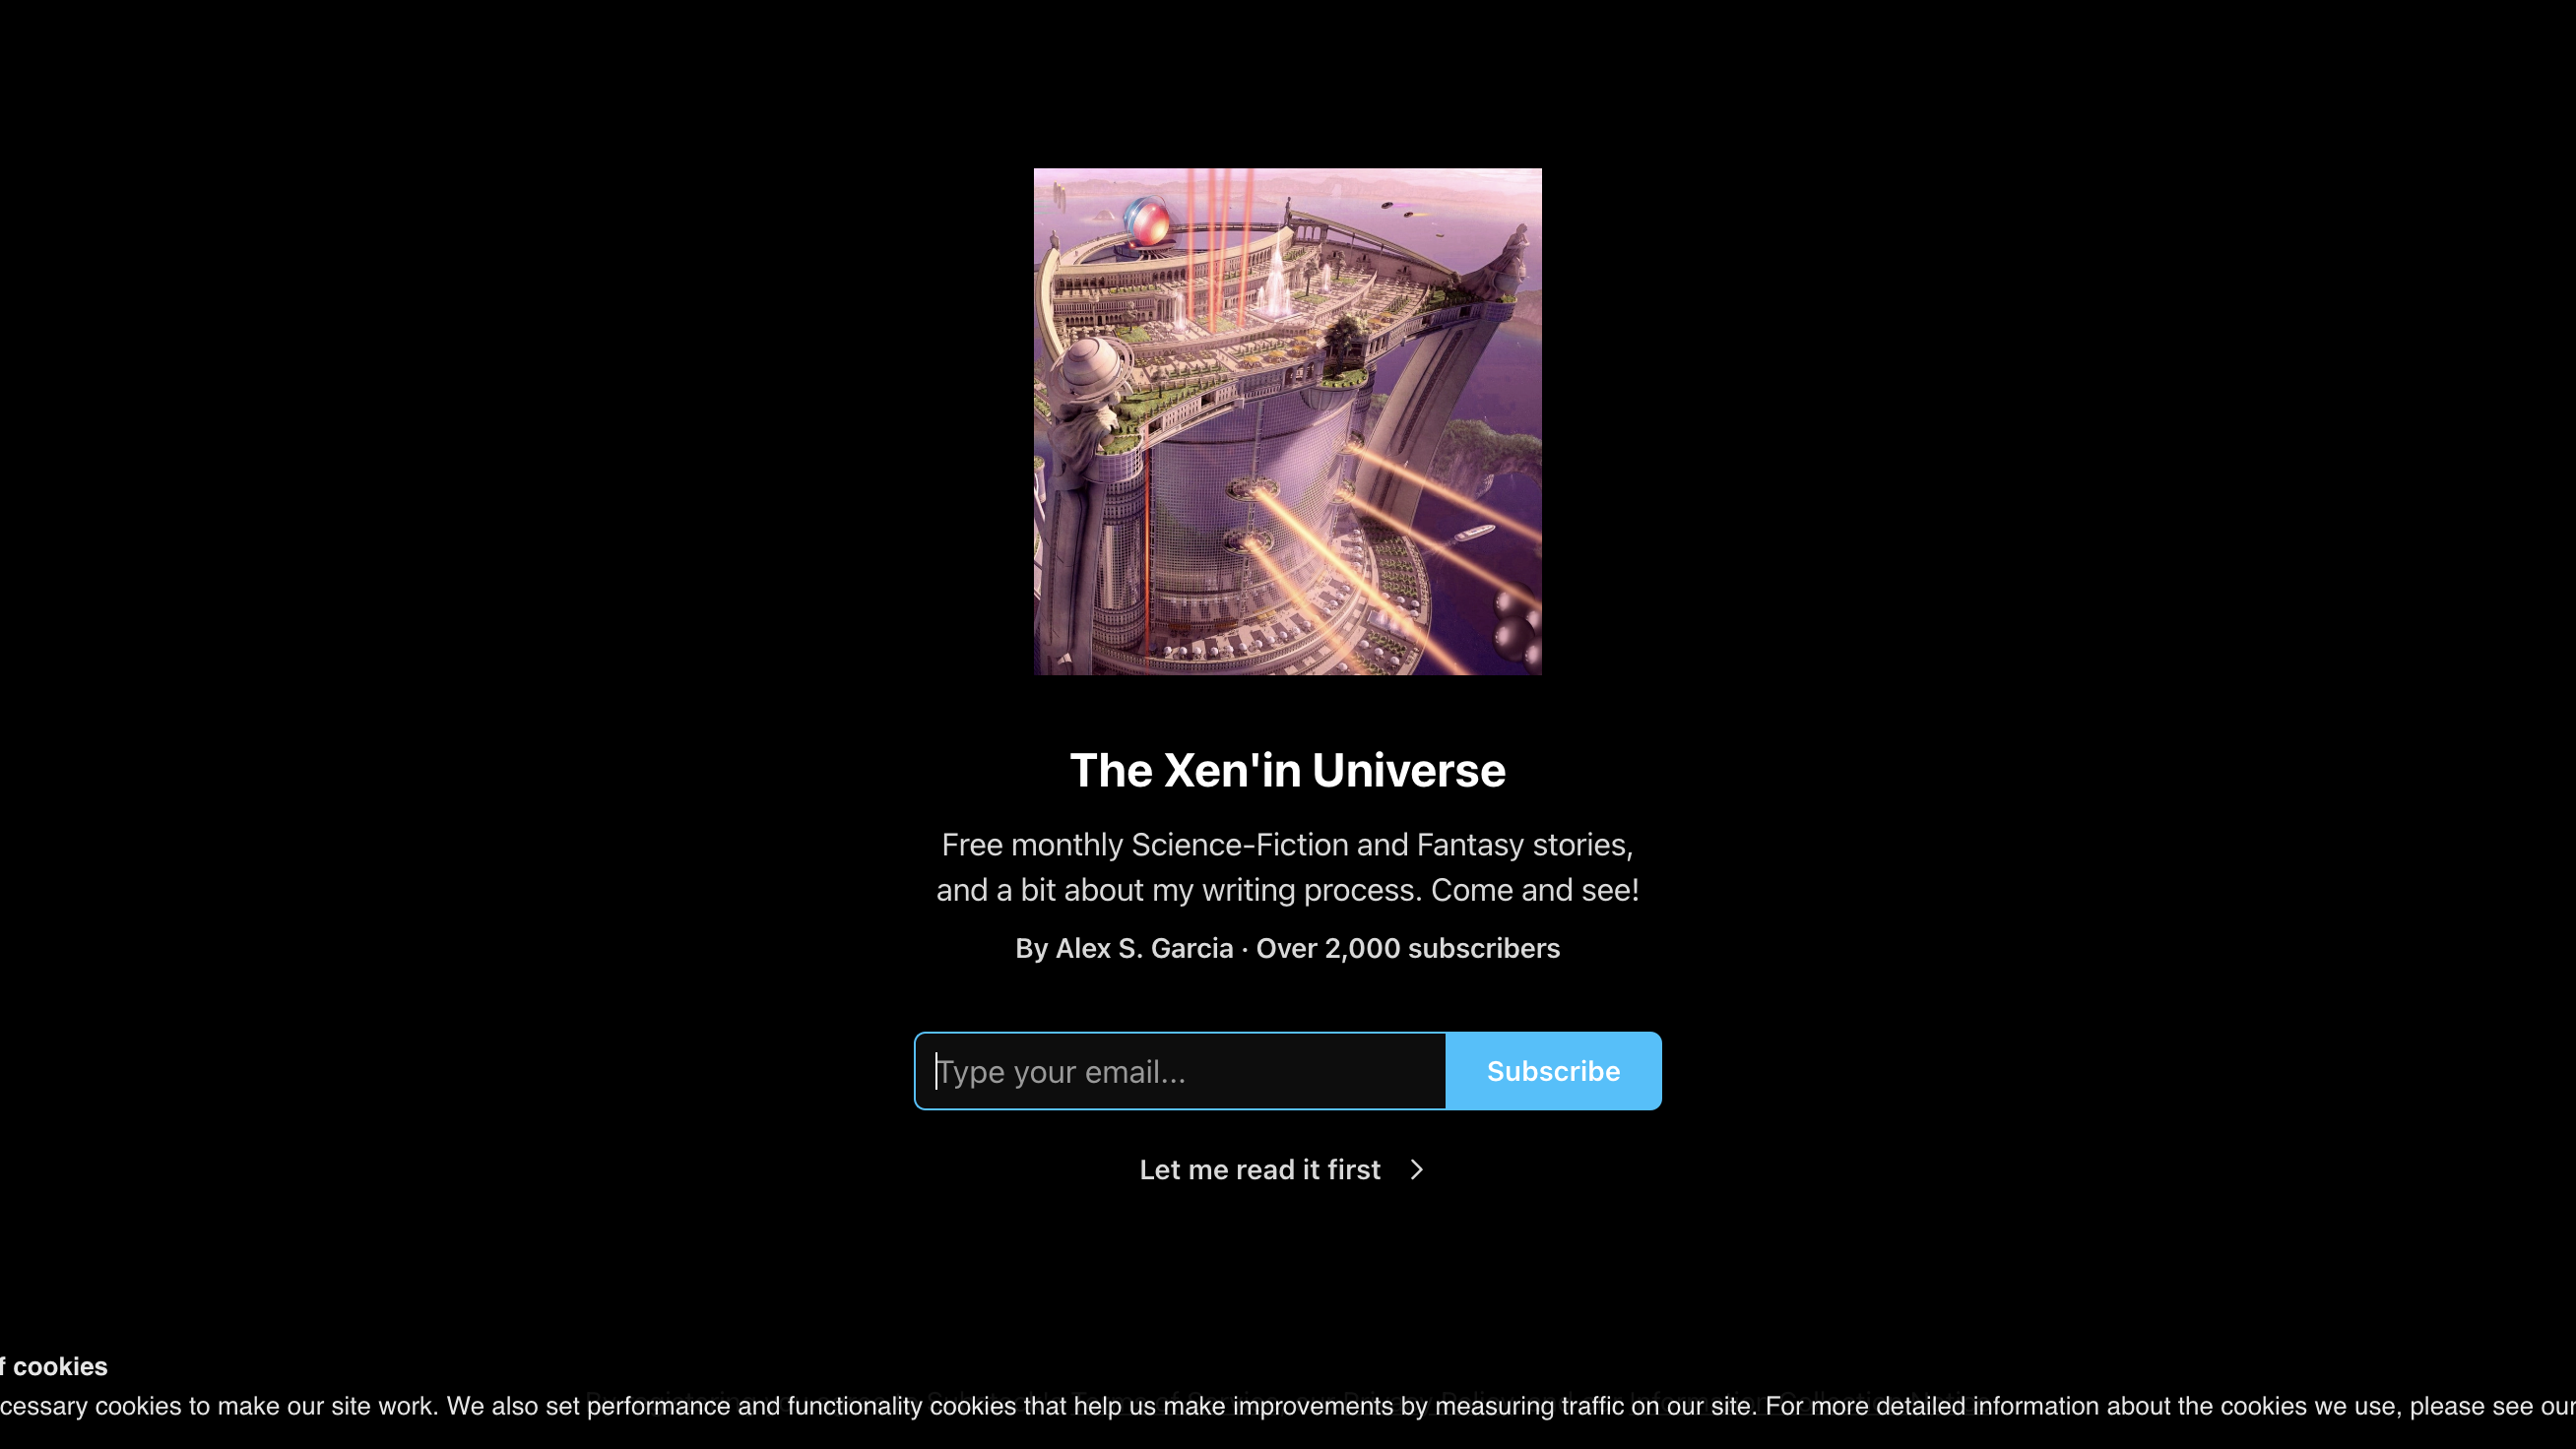 The Xenin Universe  homepage